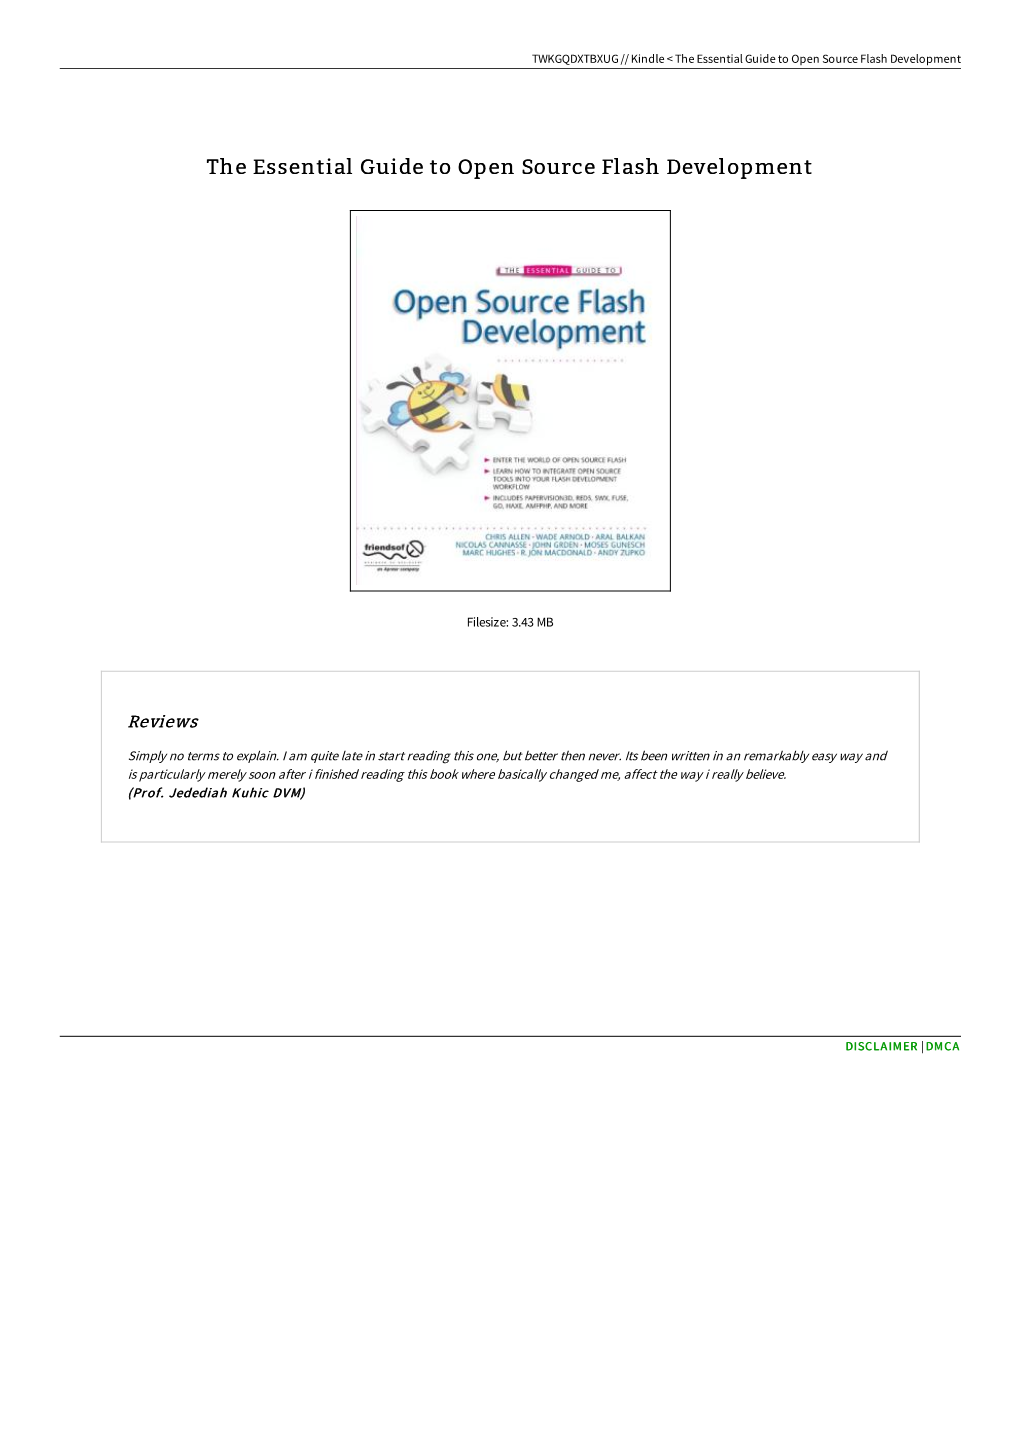 Download PDF / the Essential Guide to Open Source Flash Development